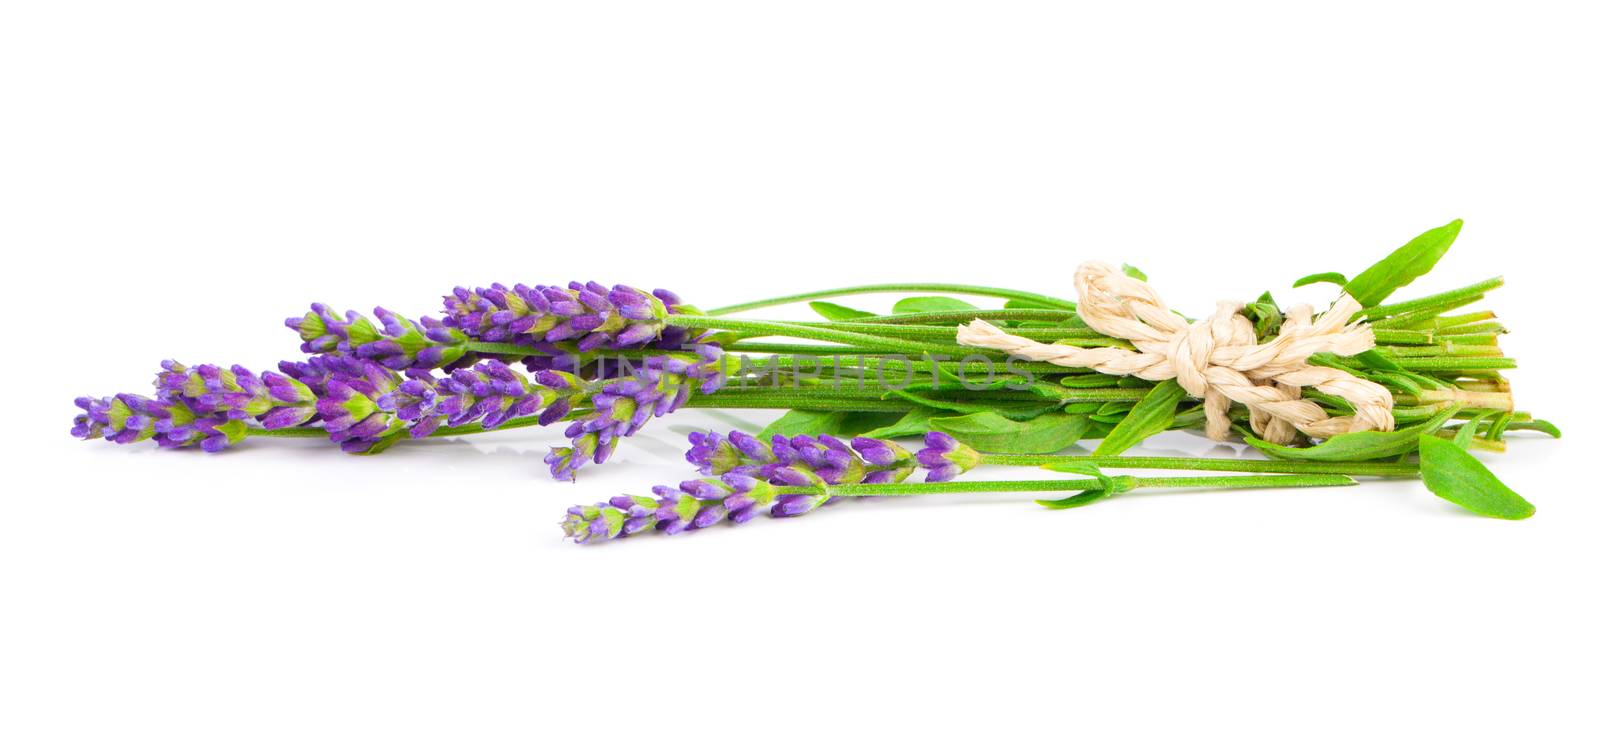 a bunch of lavender flowers on a white background by motorolka